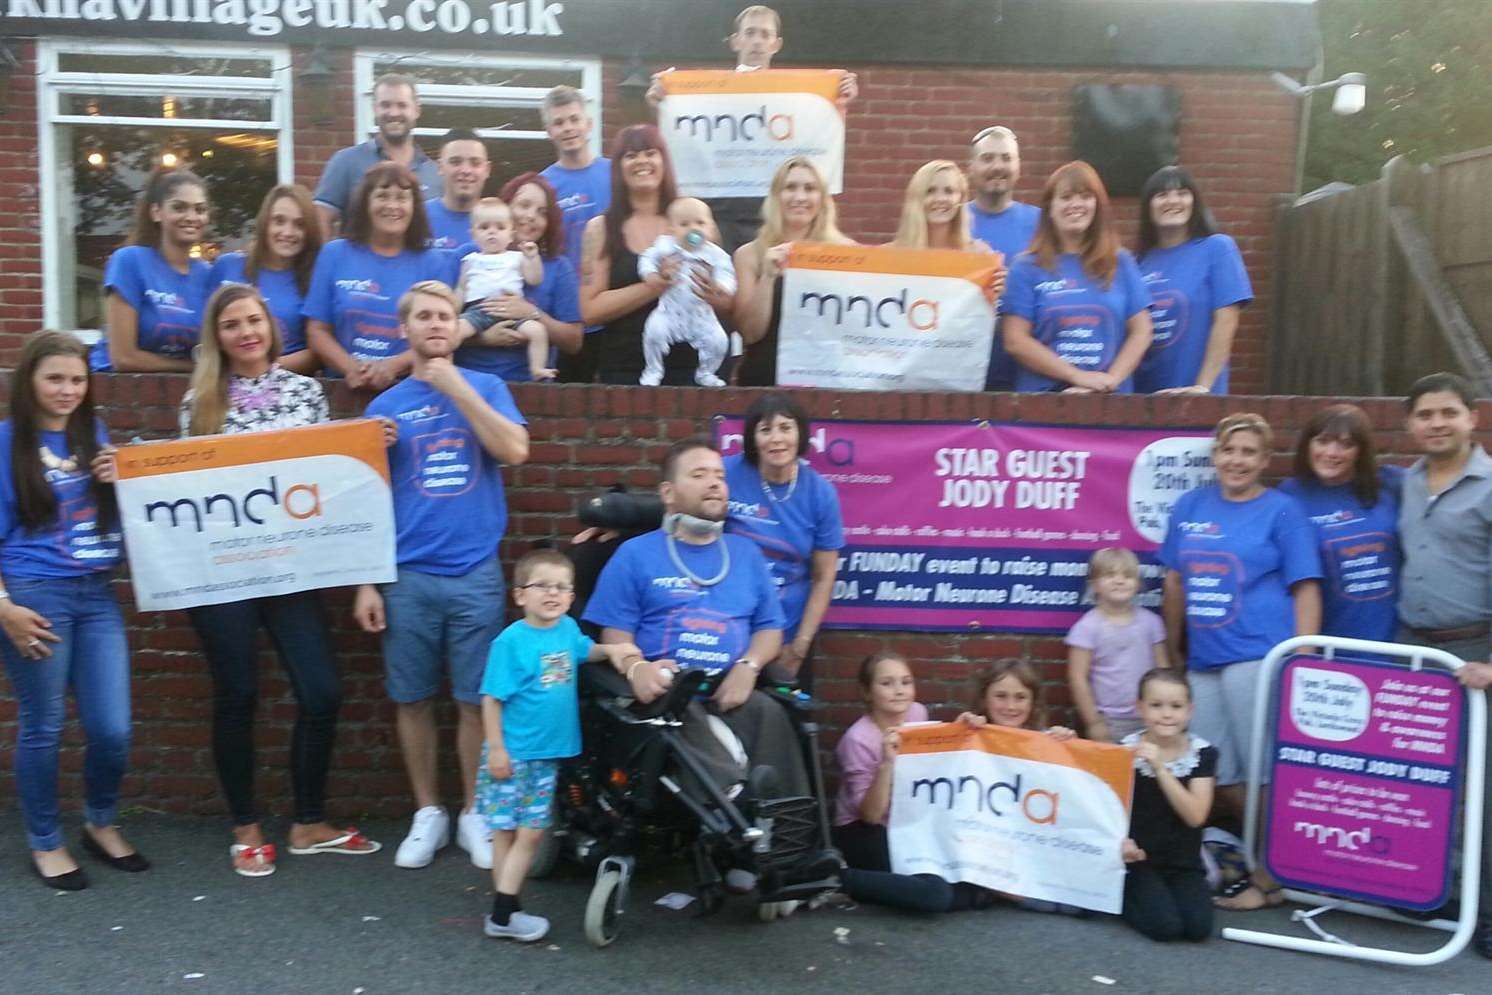 The funday raised over £5,500 for the Motor Neurone Disease Association